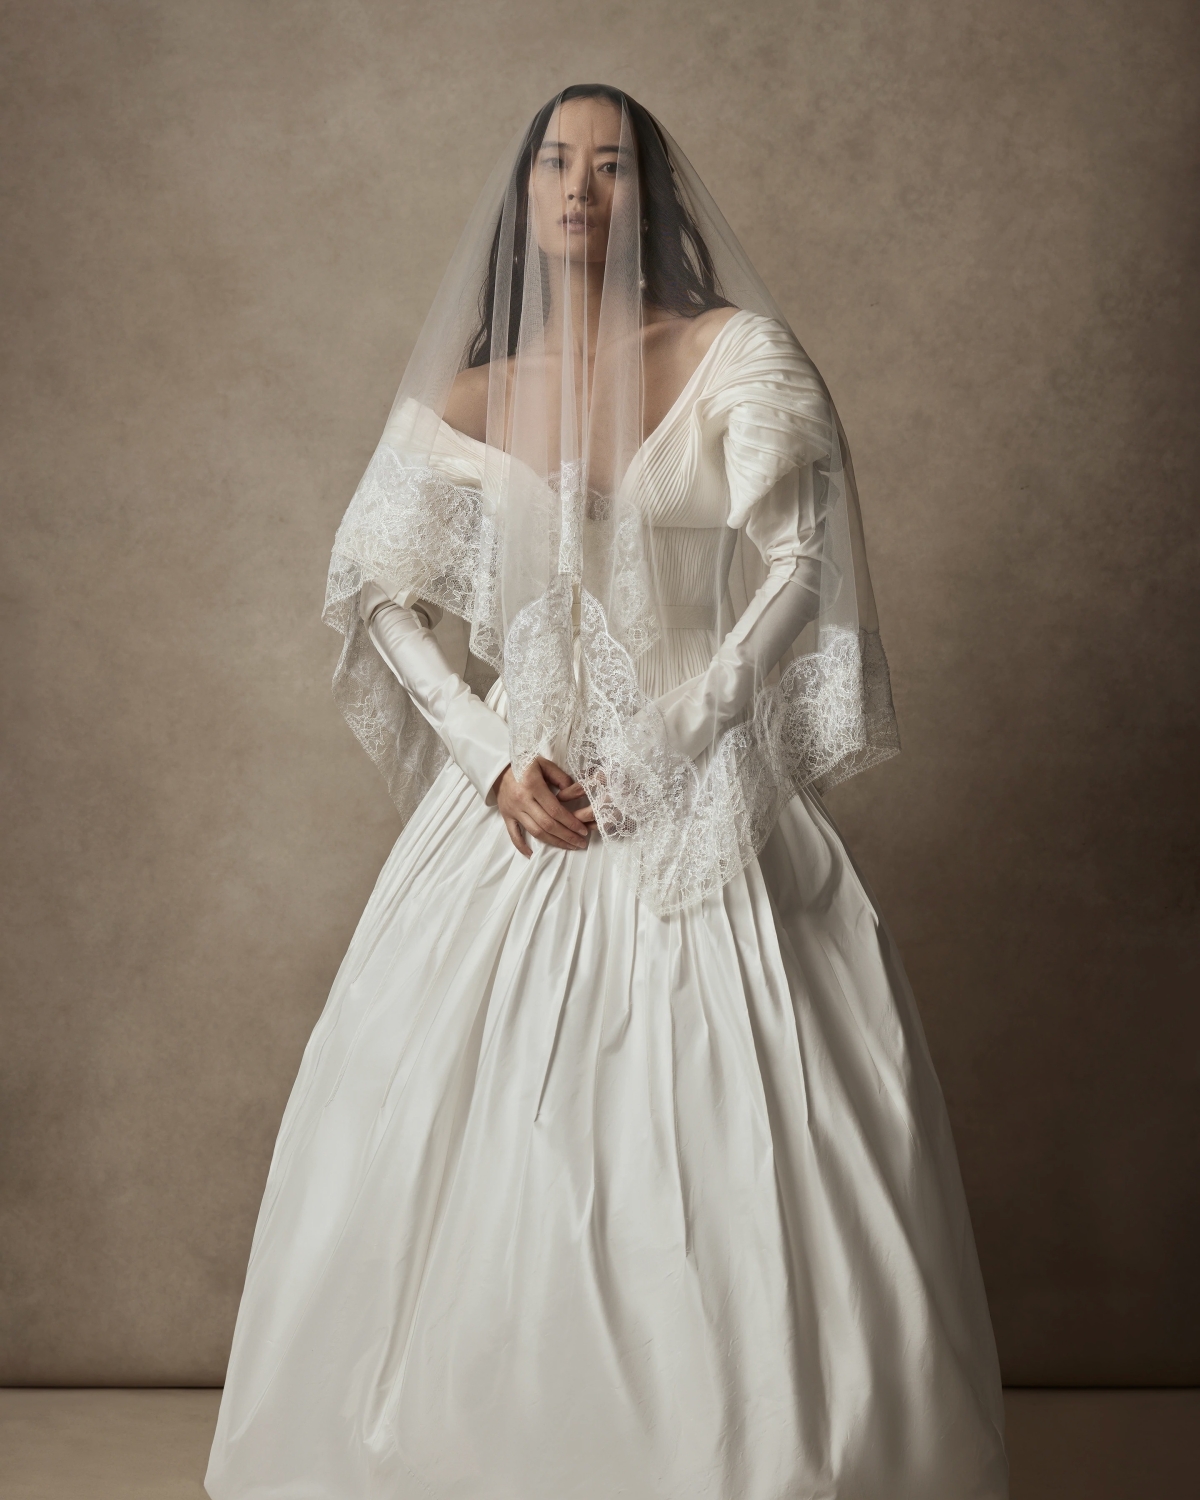 Obsess Over These 15 Unique Wedding Veil Alternatives - Tidewater and Tulle